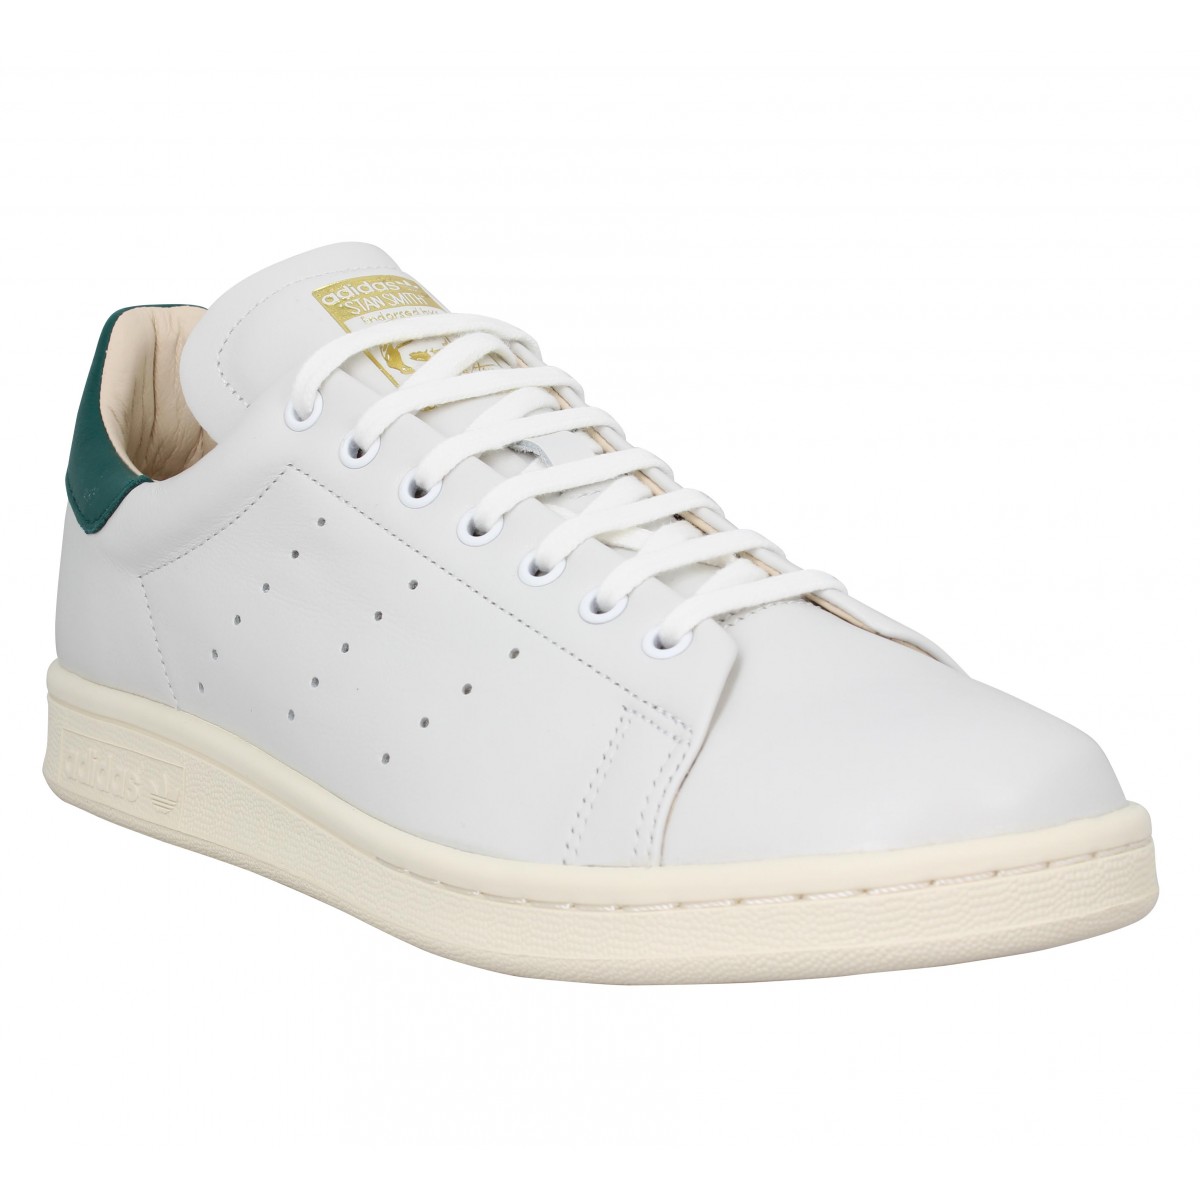 Velocidad supersónica litro envío Adidas stan smith recon cuir homme blanc vert noble homme | Fanny chaussures